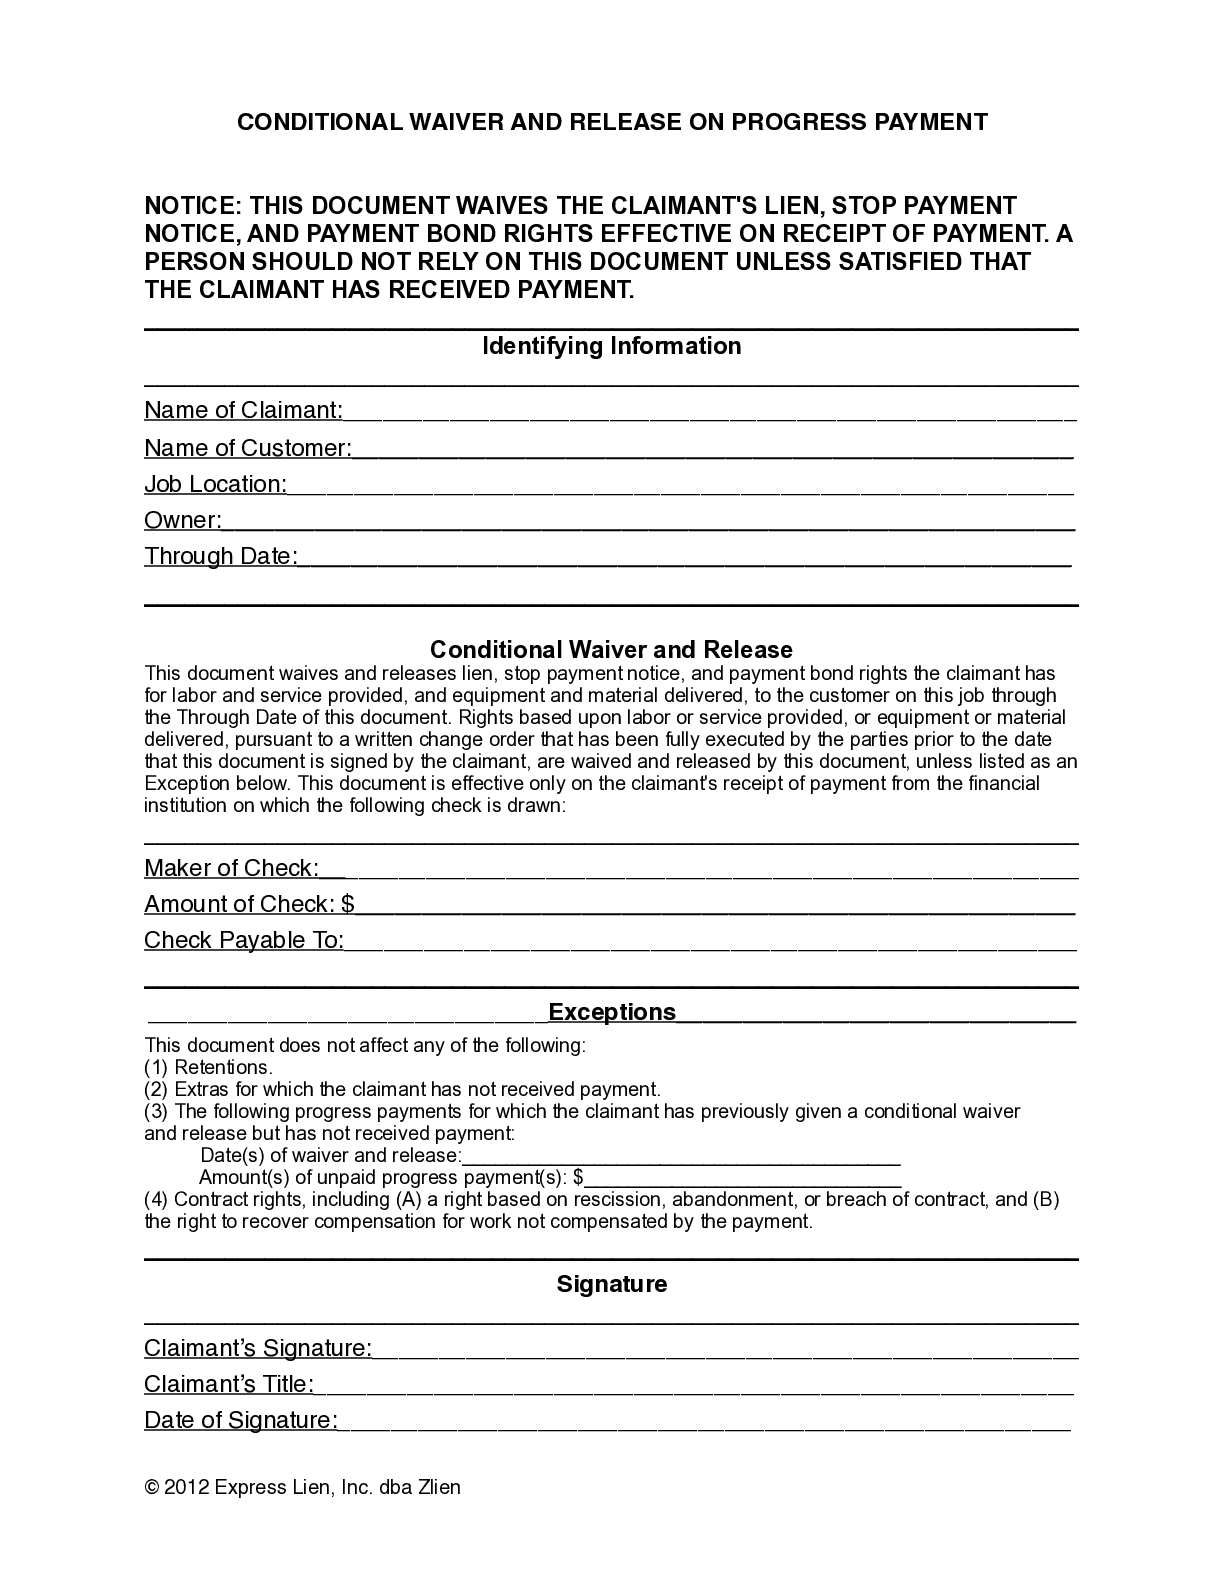 Virginia Partial Conditional Lien Waiver Form - free from